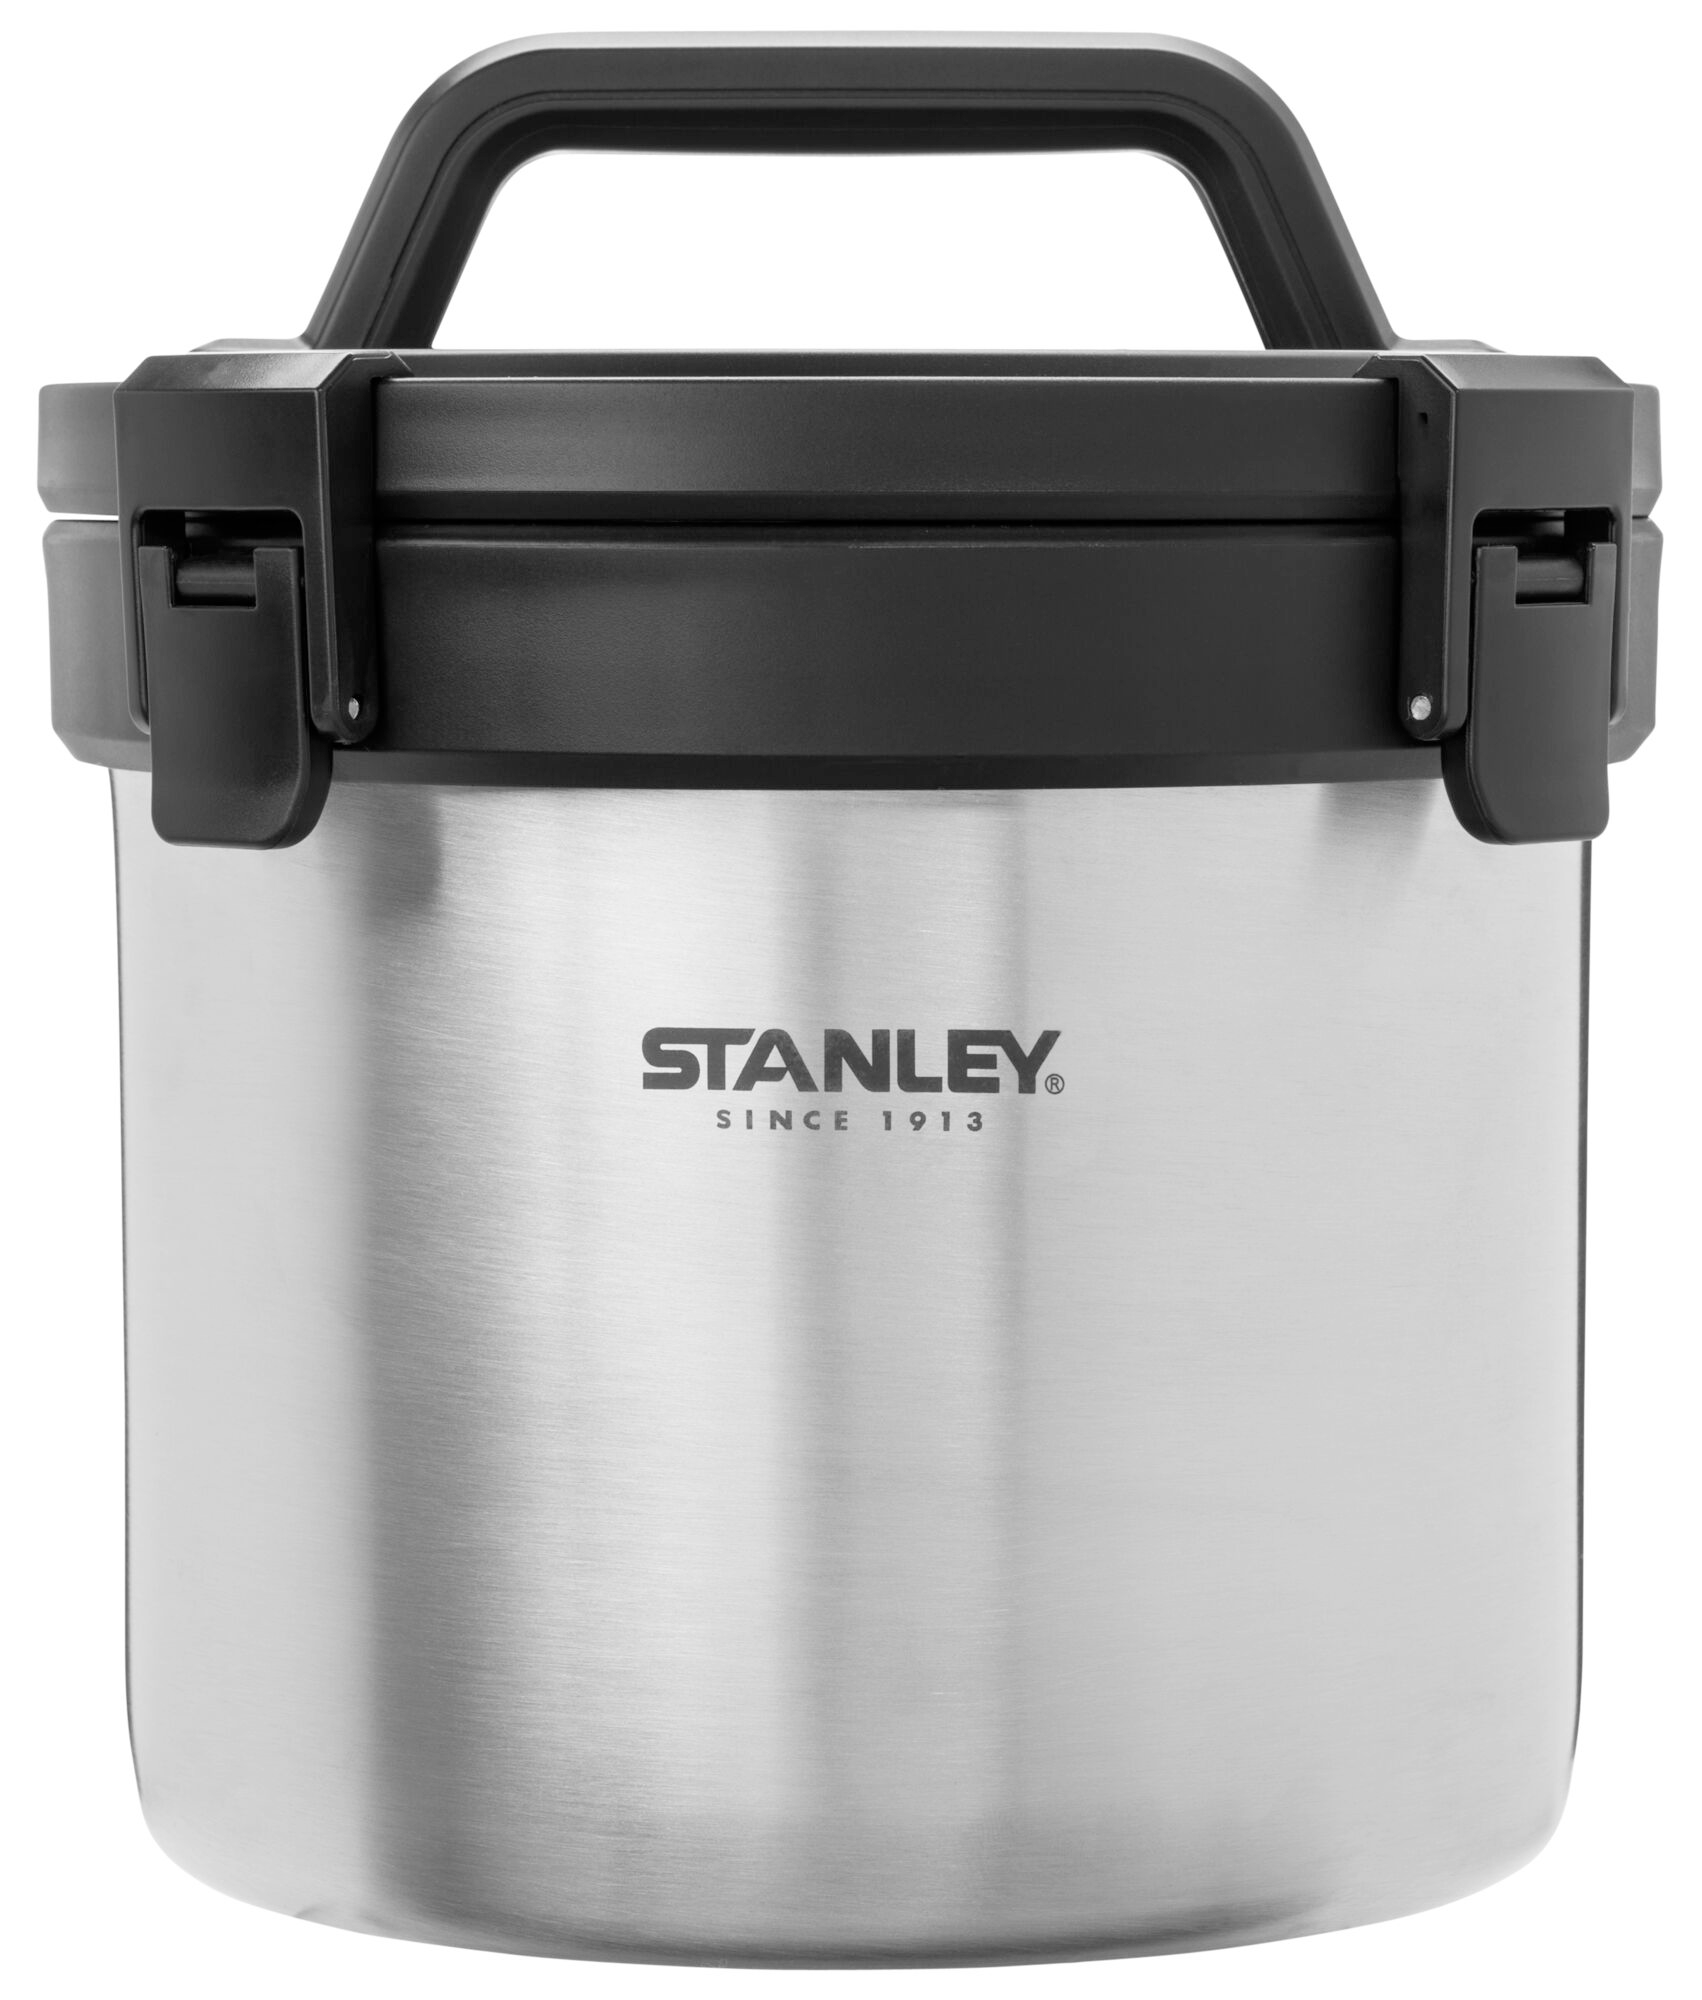 Stanley Classic Lunch Box and Classic Vacuum Food Jar Combo